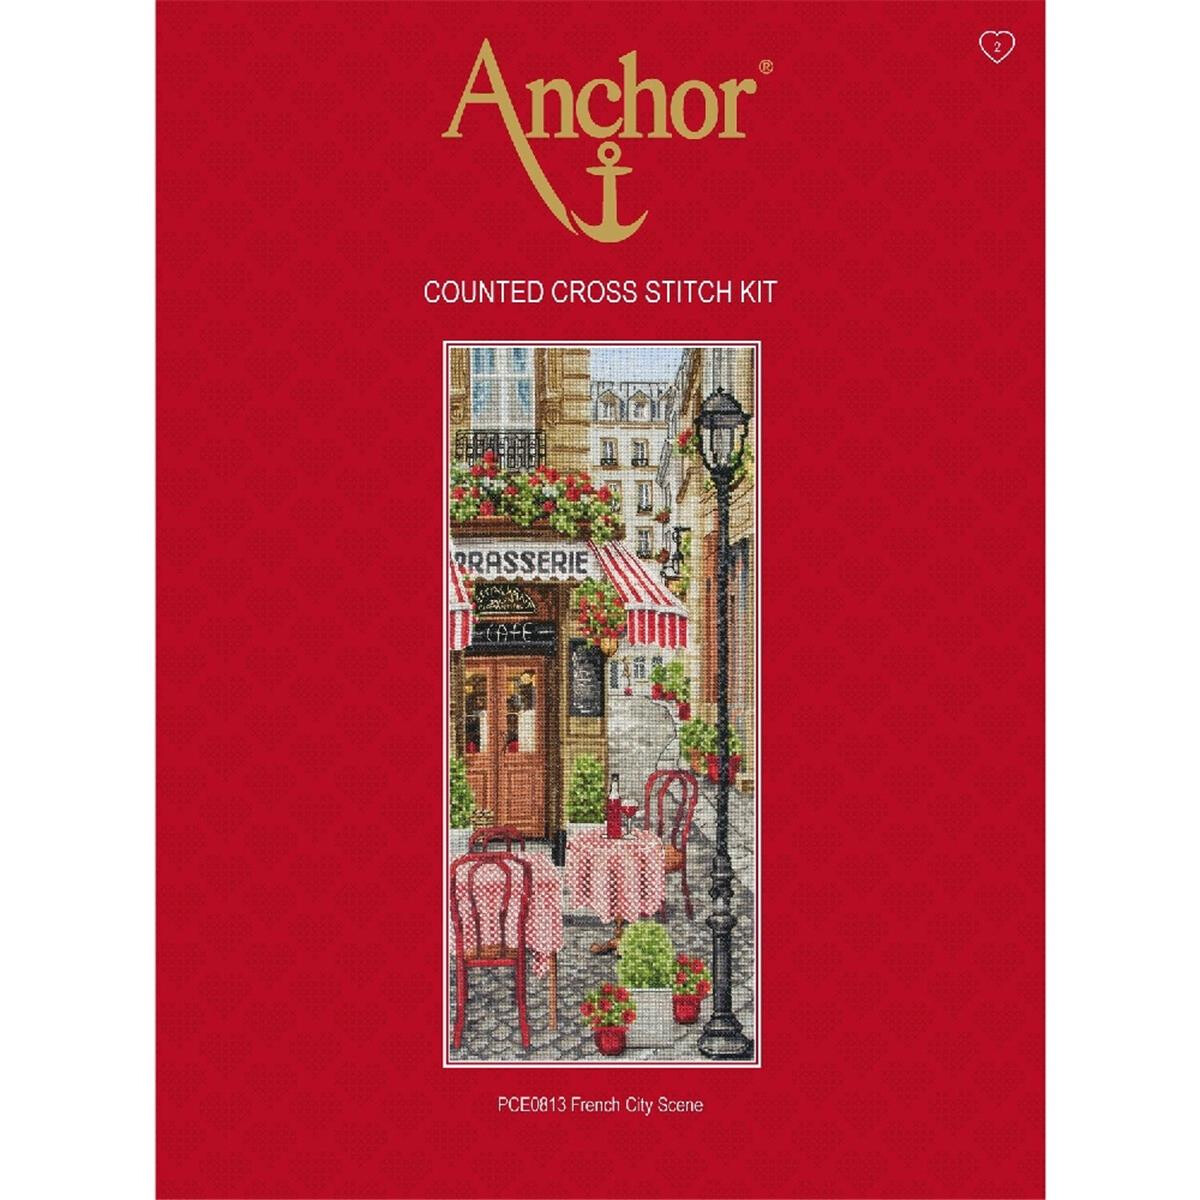 Anchor counted Cross Stitch kit "French City...